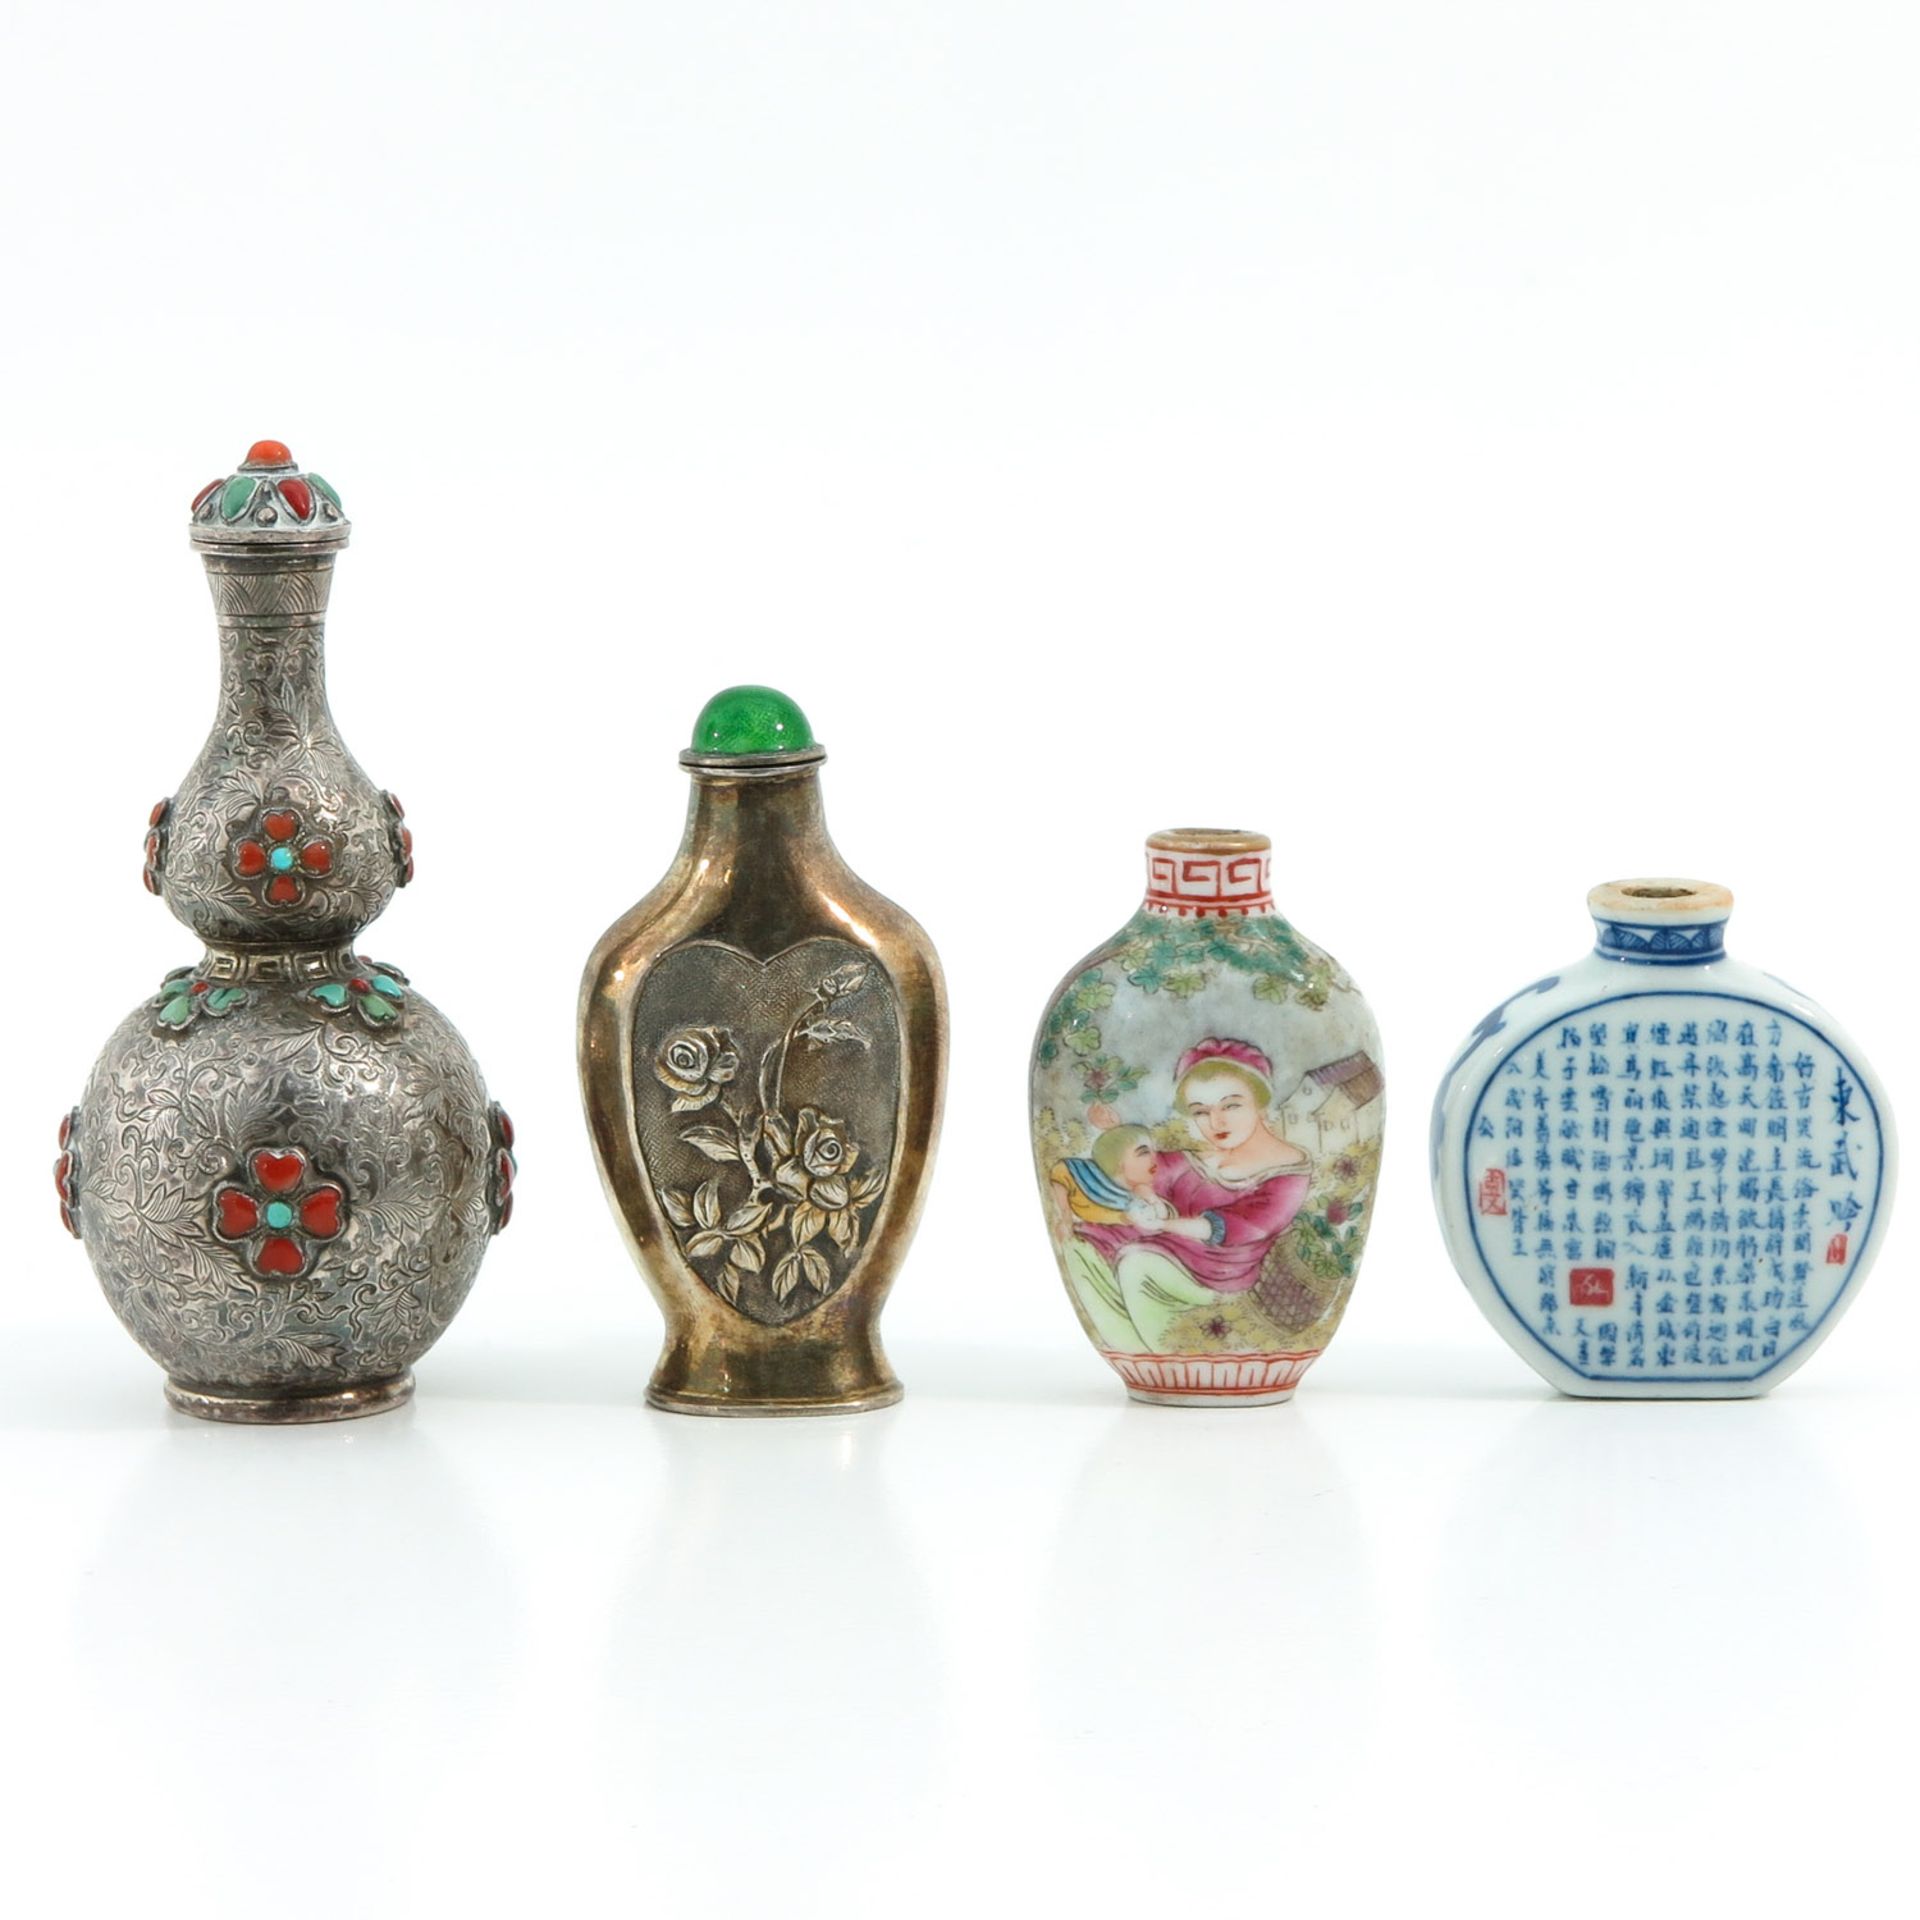 A Diverse Collection of 4 Snuff Bottles